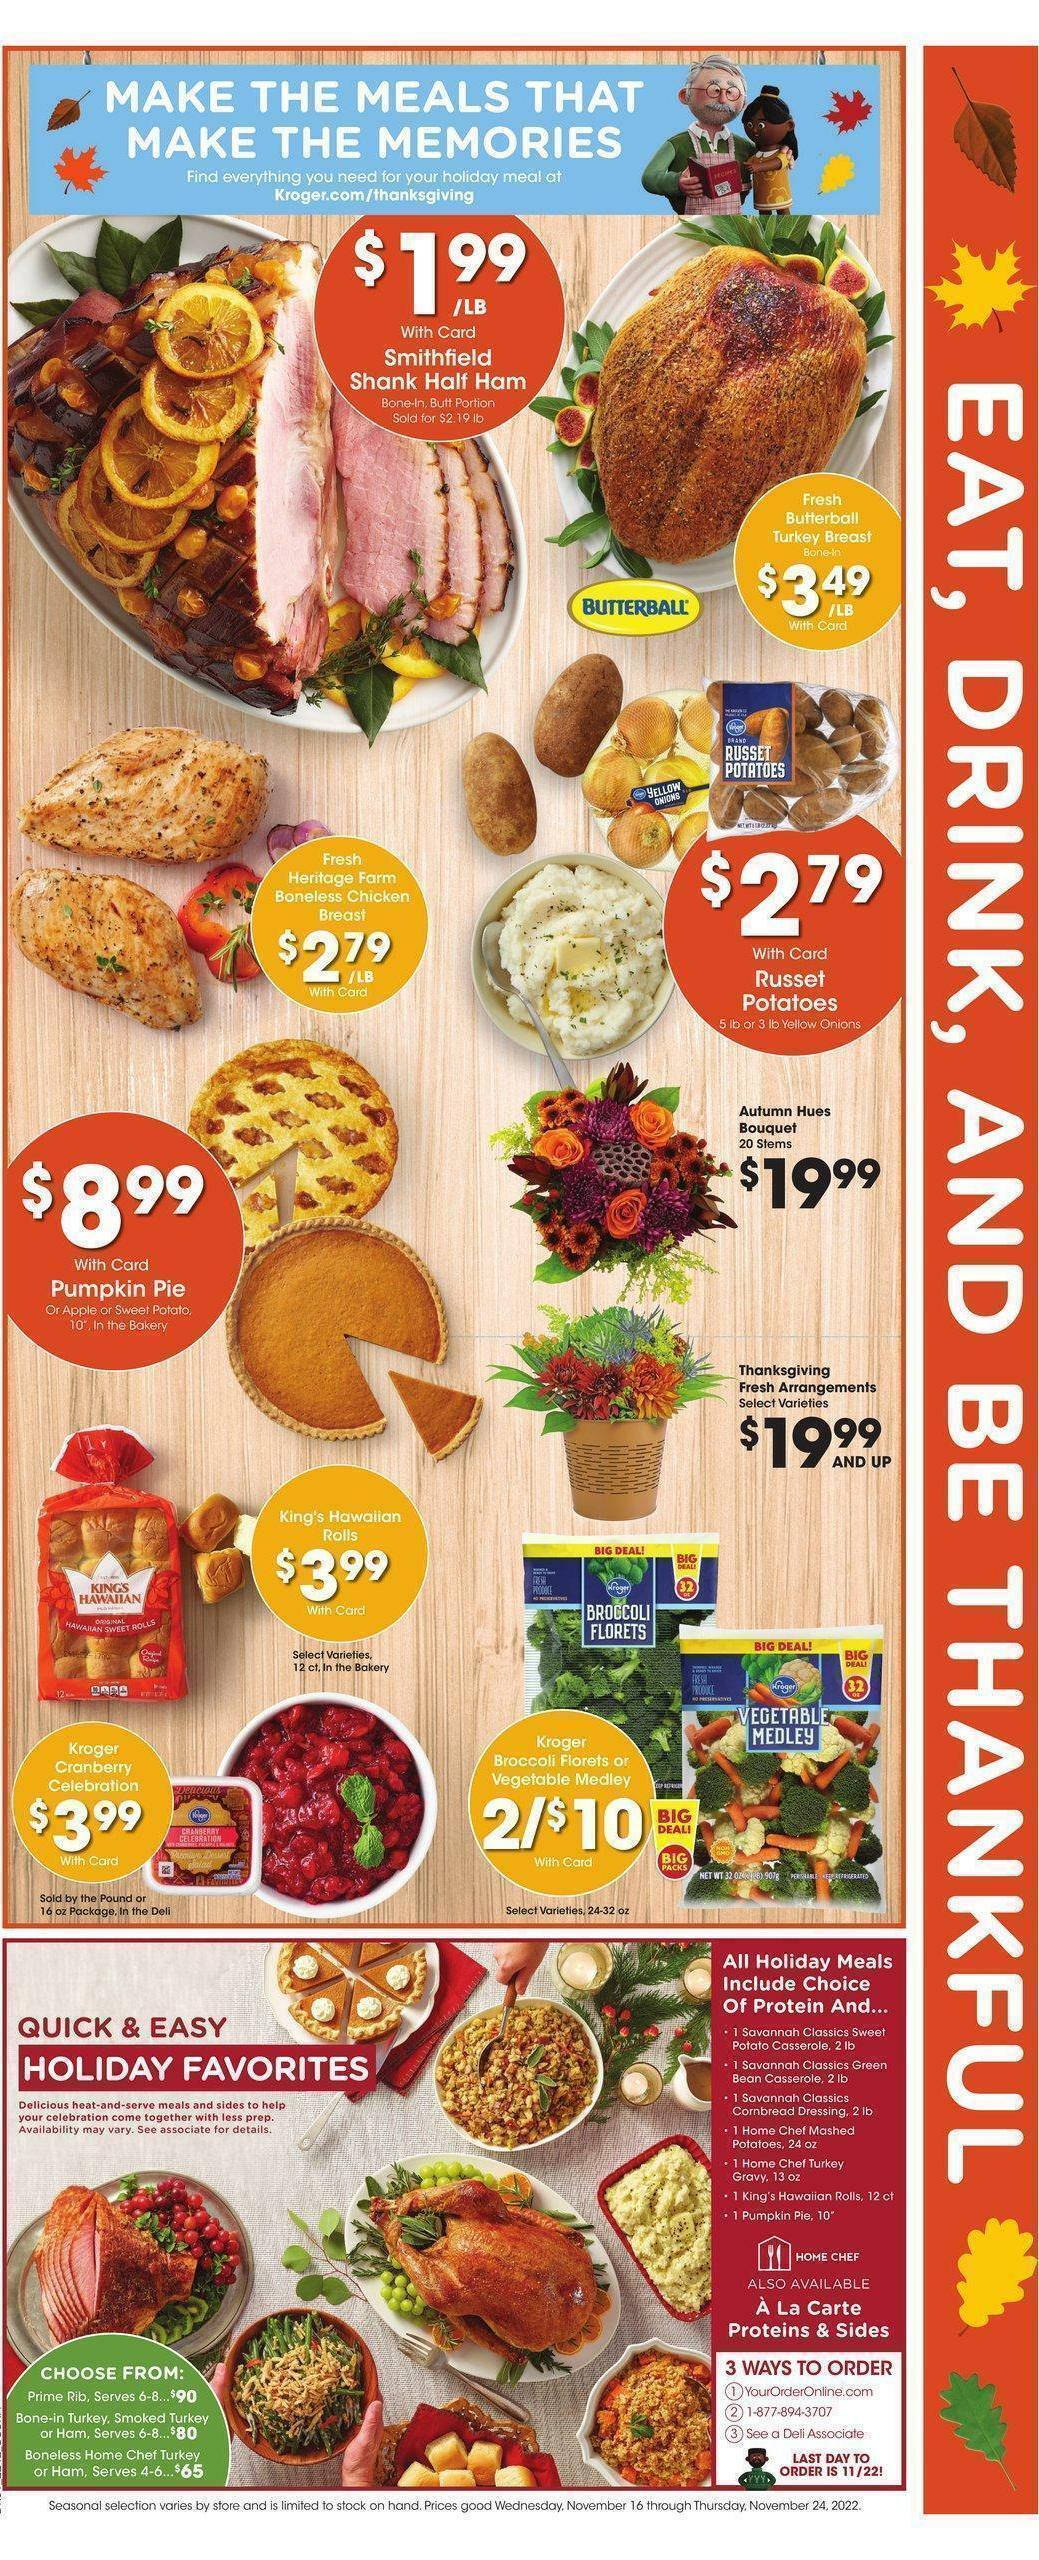 Kroger Weekly Ad from November 16